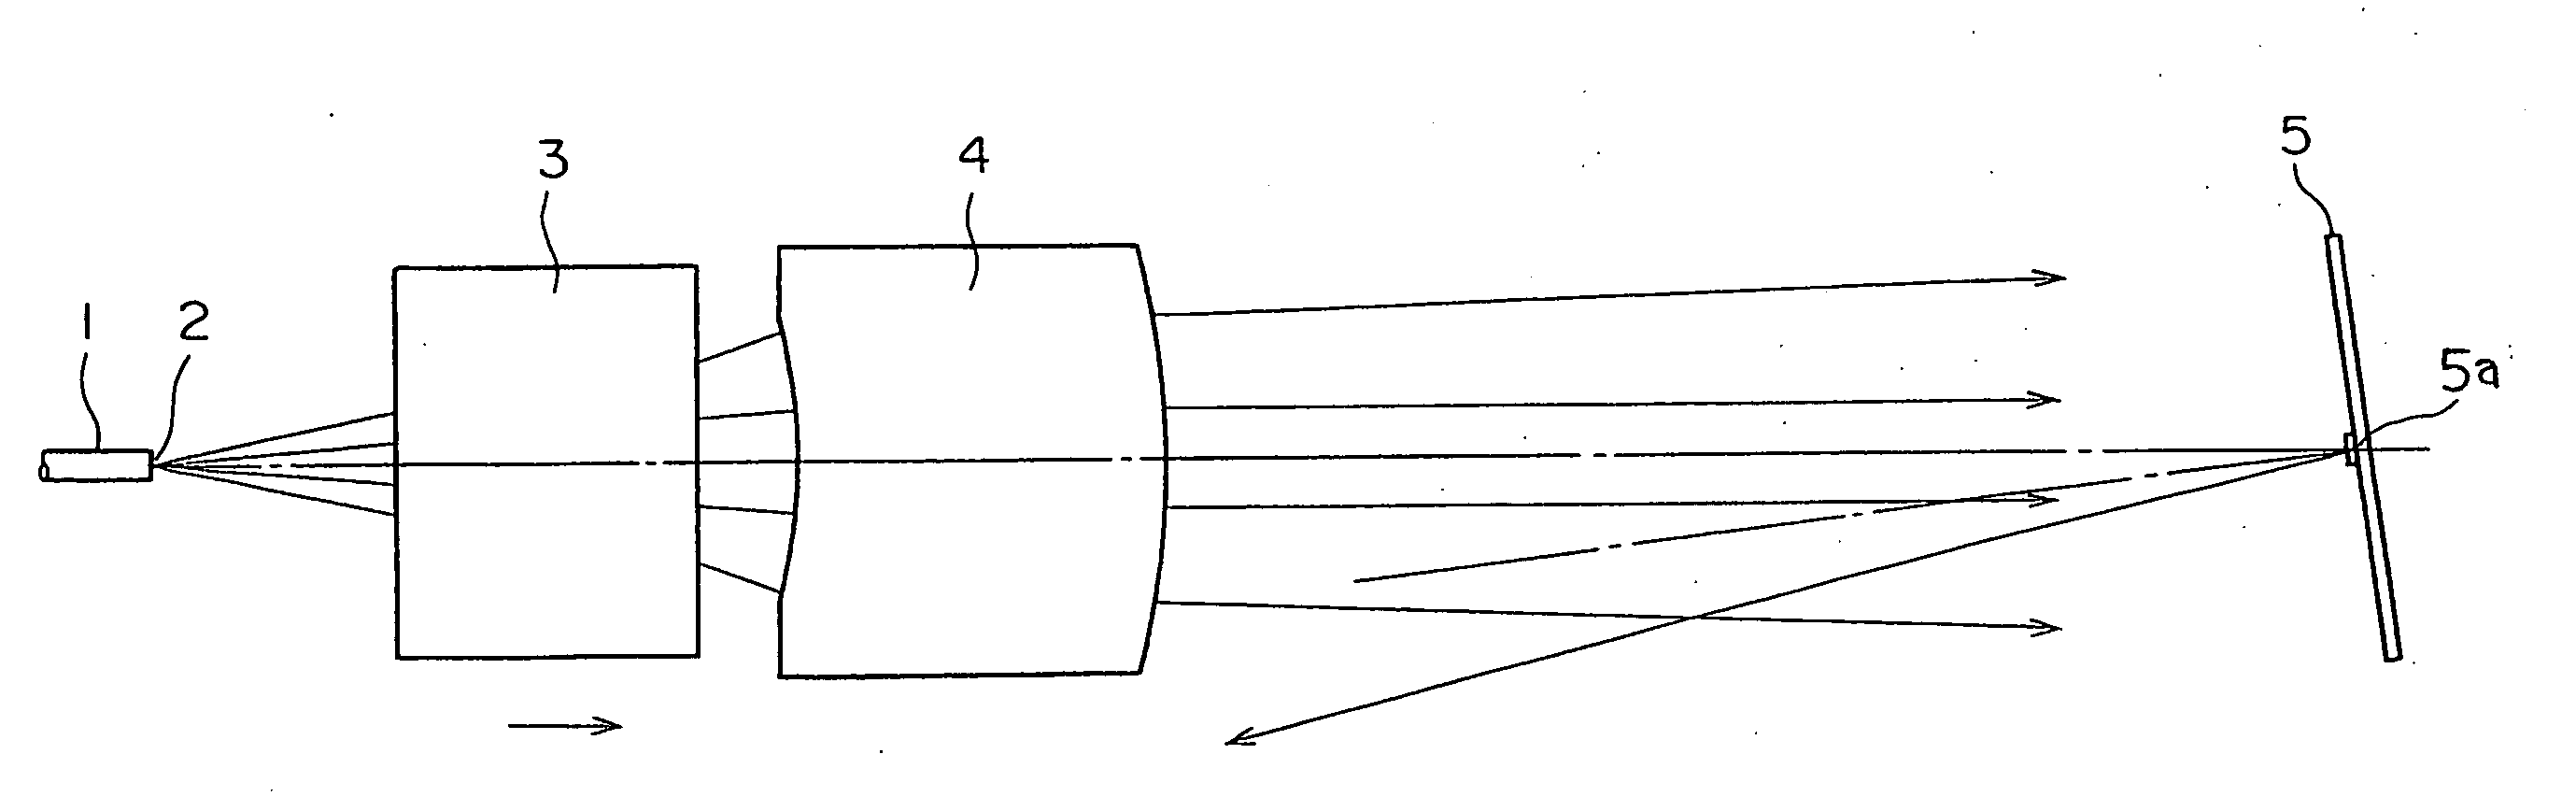 Optical system for reinforcing optical tweezers capturing force